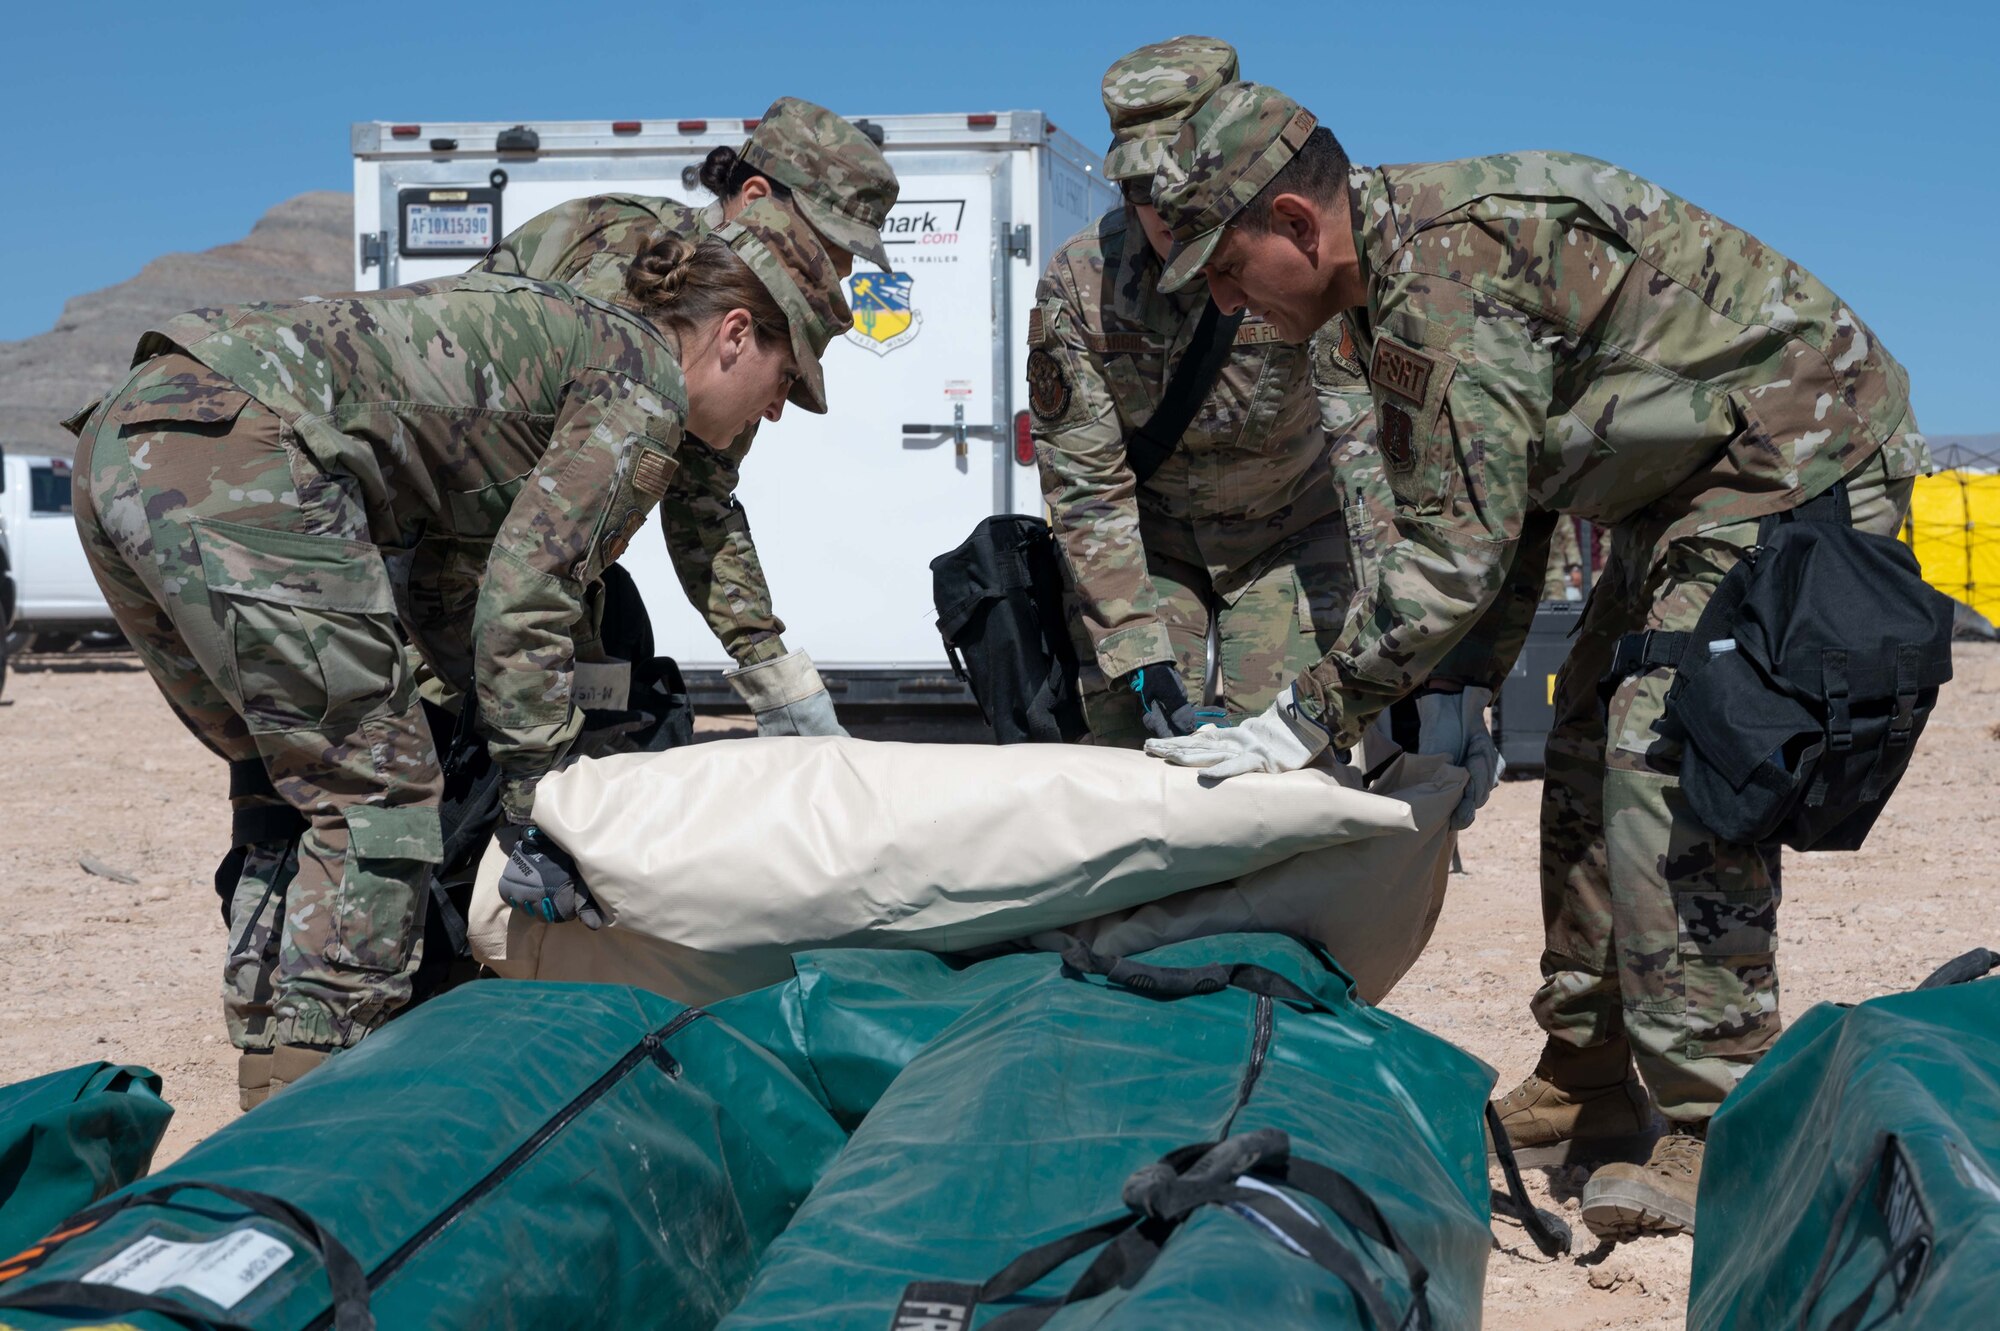 162nd FSS Specialists unload equipment during an in-person combined training event with other Air and Army National Guard units this week in Las Vegas.